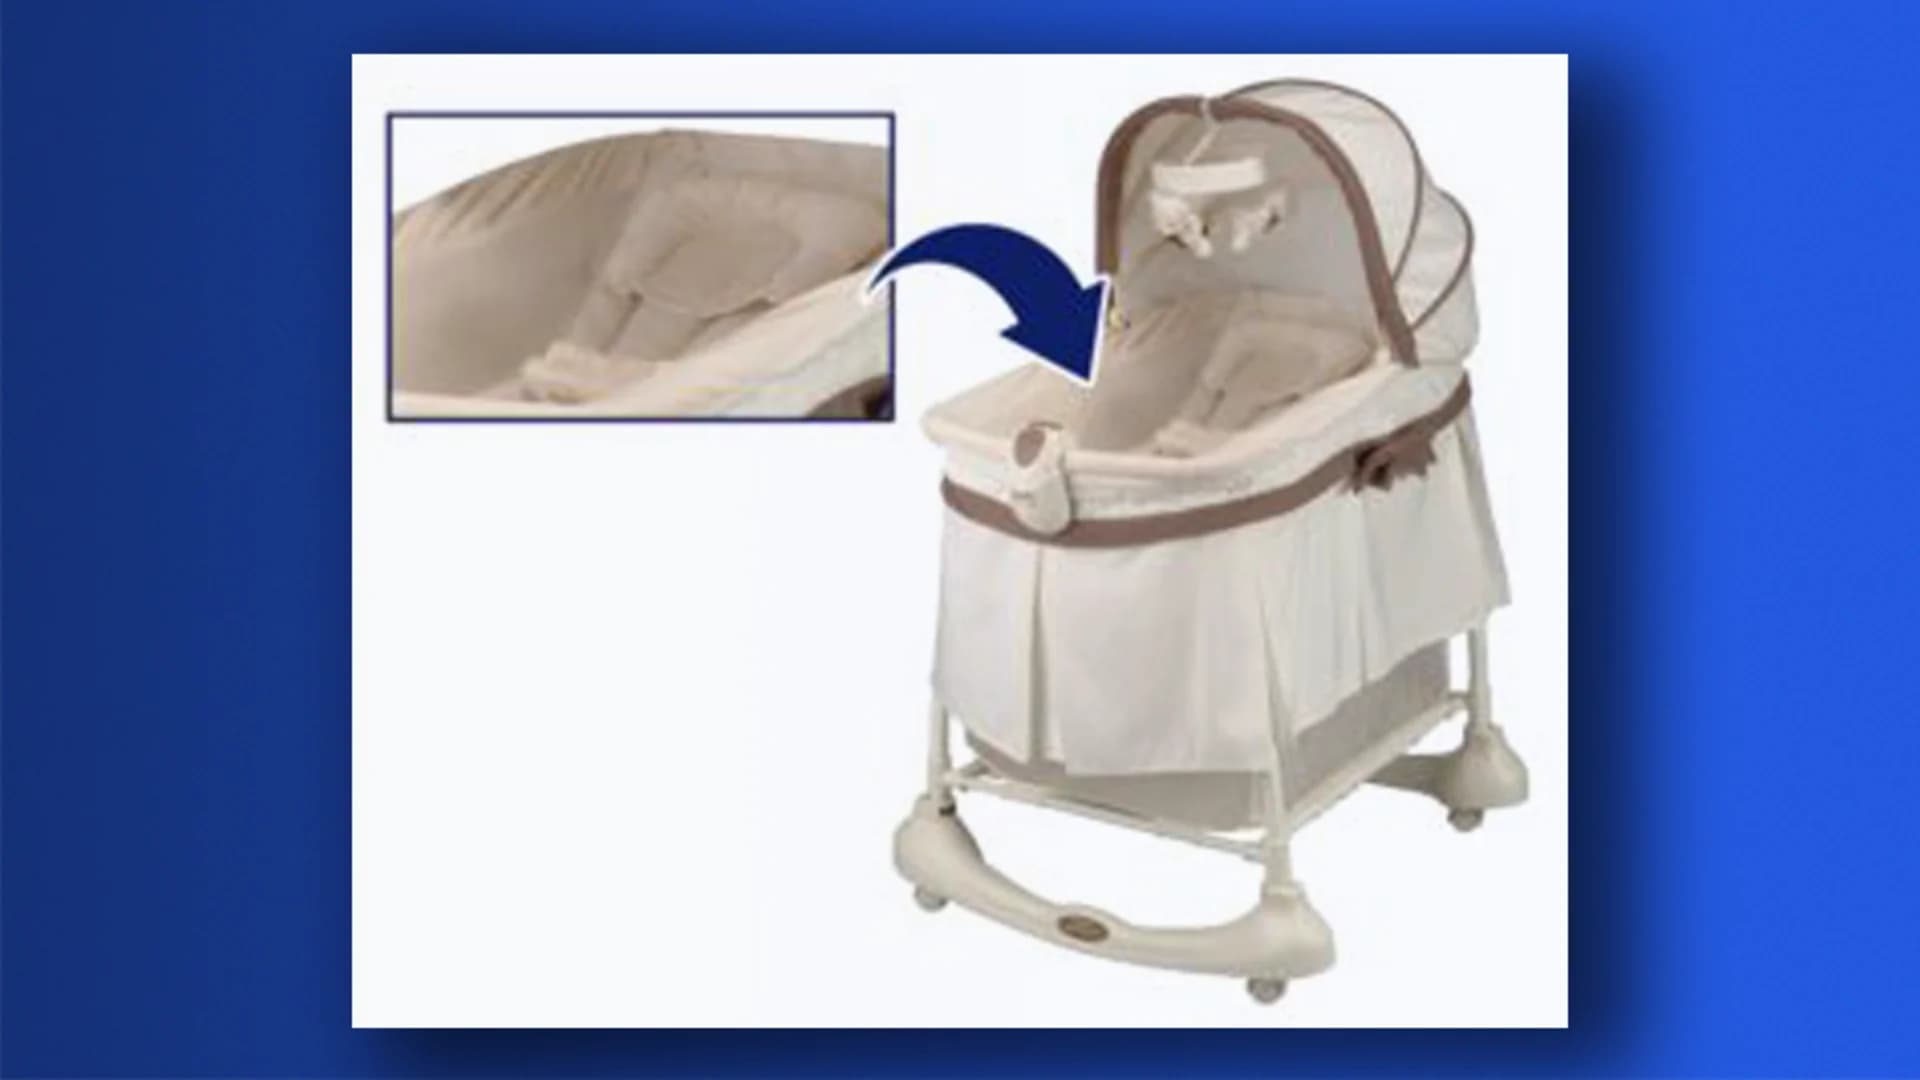 Company recalls 51,000 inclined sleeper accessories for safety reasons